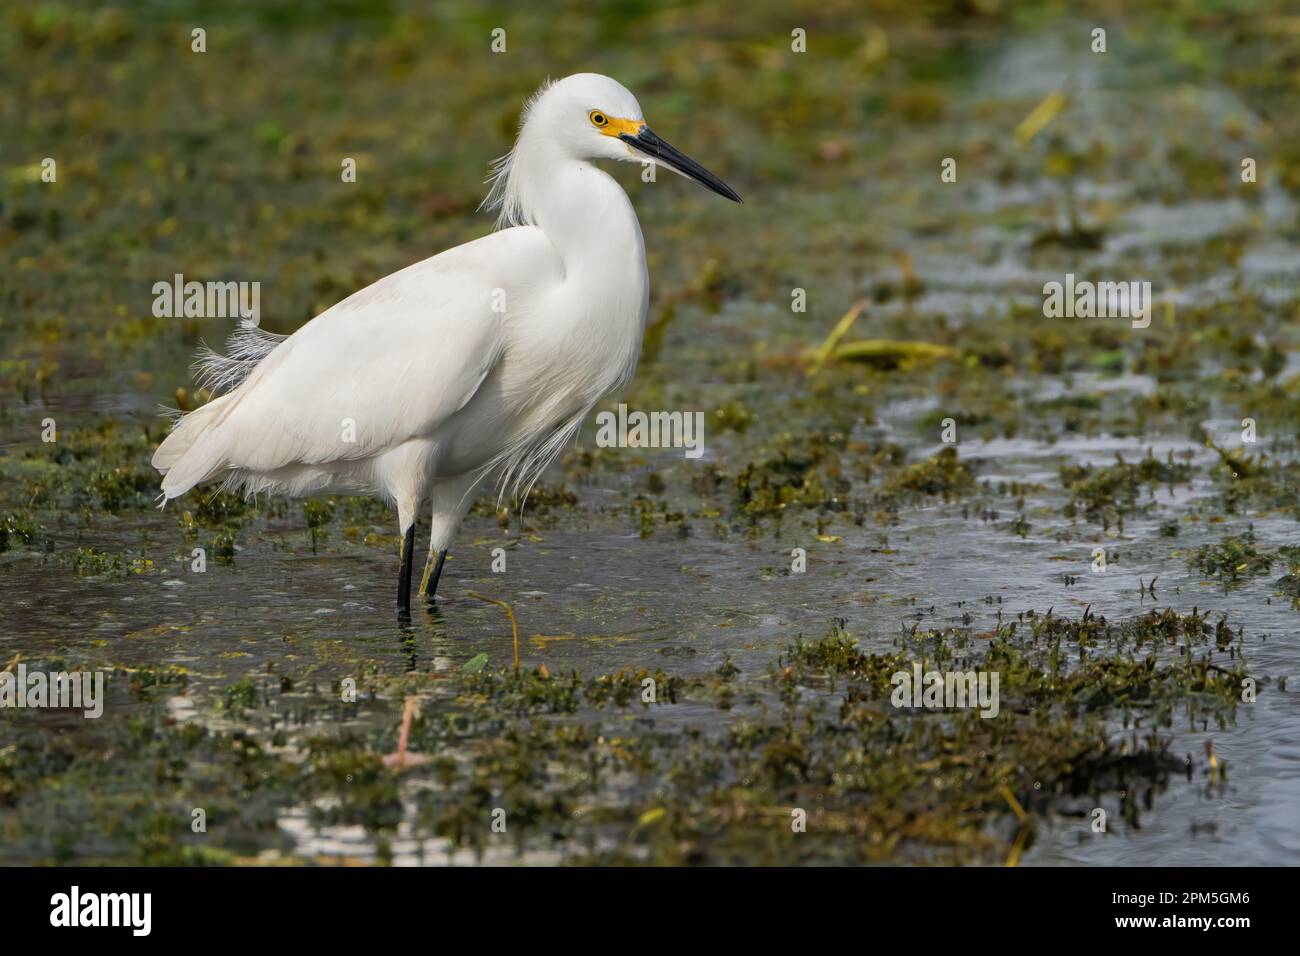 A Snowy Egret Perched in a Florida Wetland Stock Photo